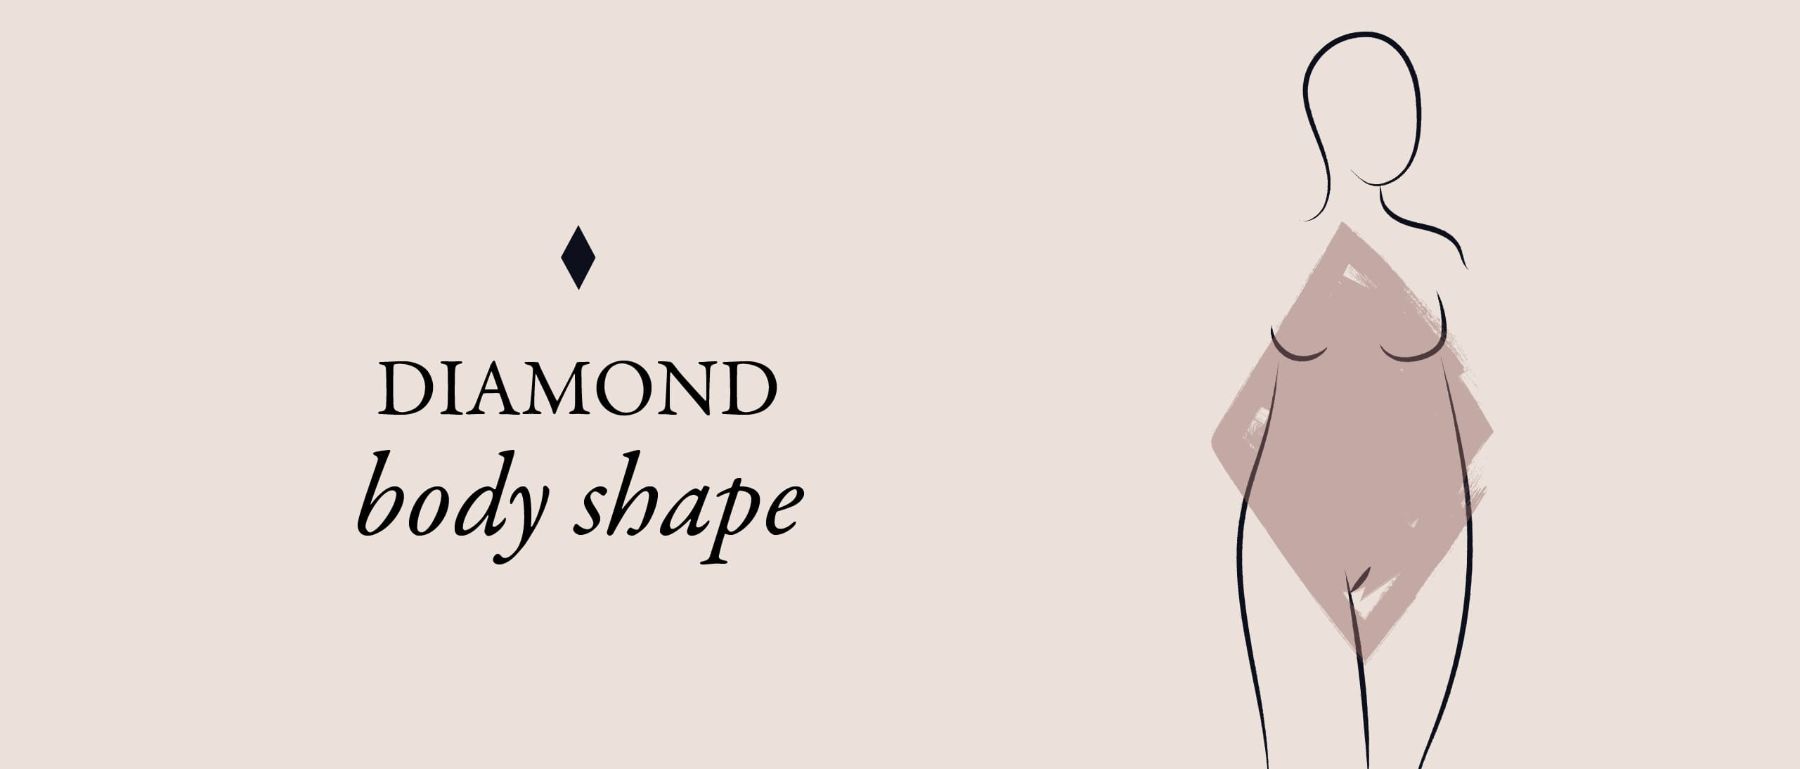 What is a diamond body type?